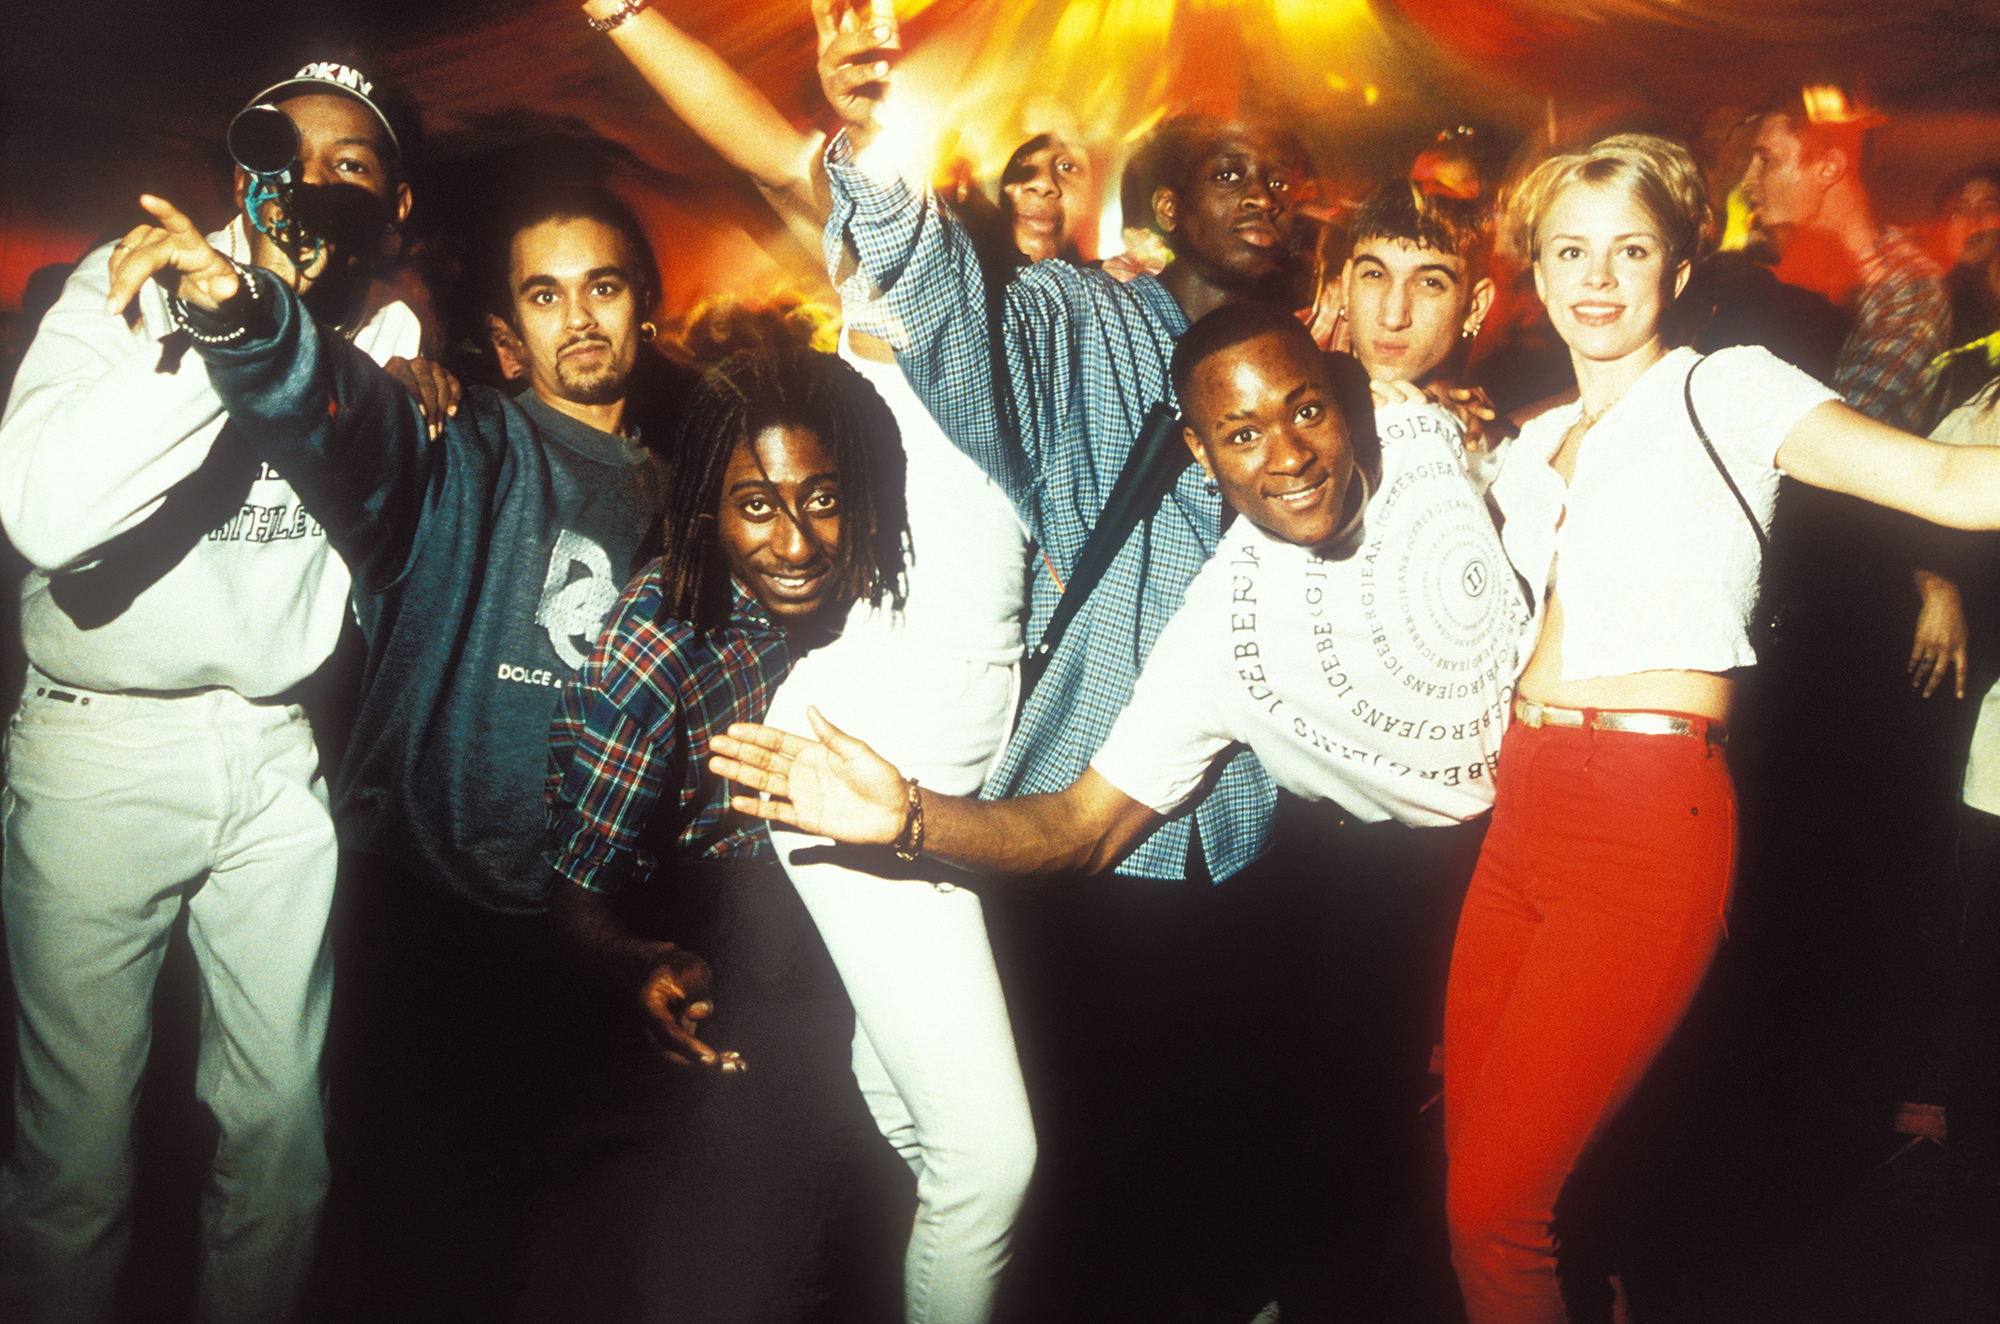 A group of young men and women of different ethnicities posing at what appears to be a rave, with bright red and yellow light pouring down and people dancing behind them.